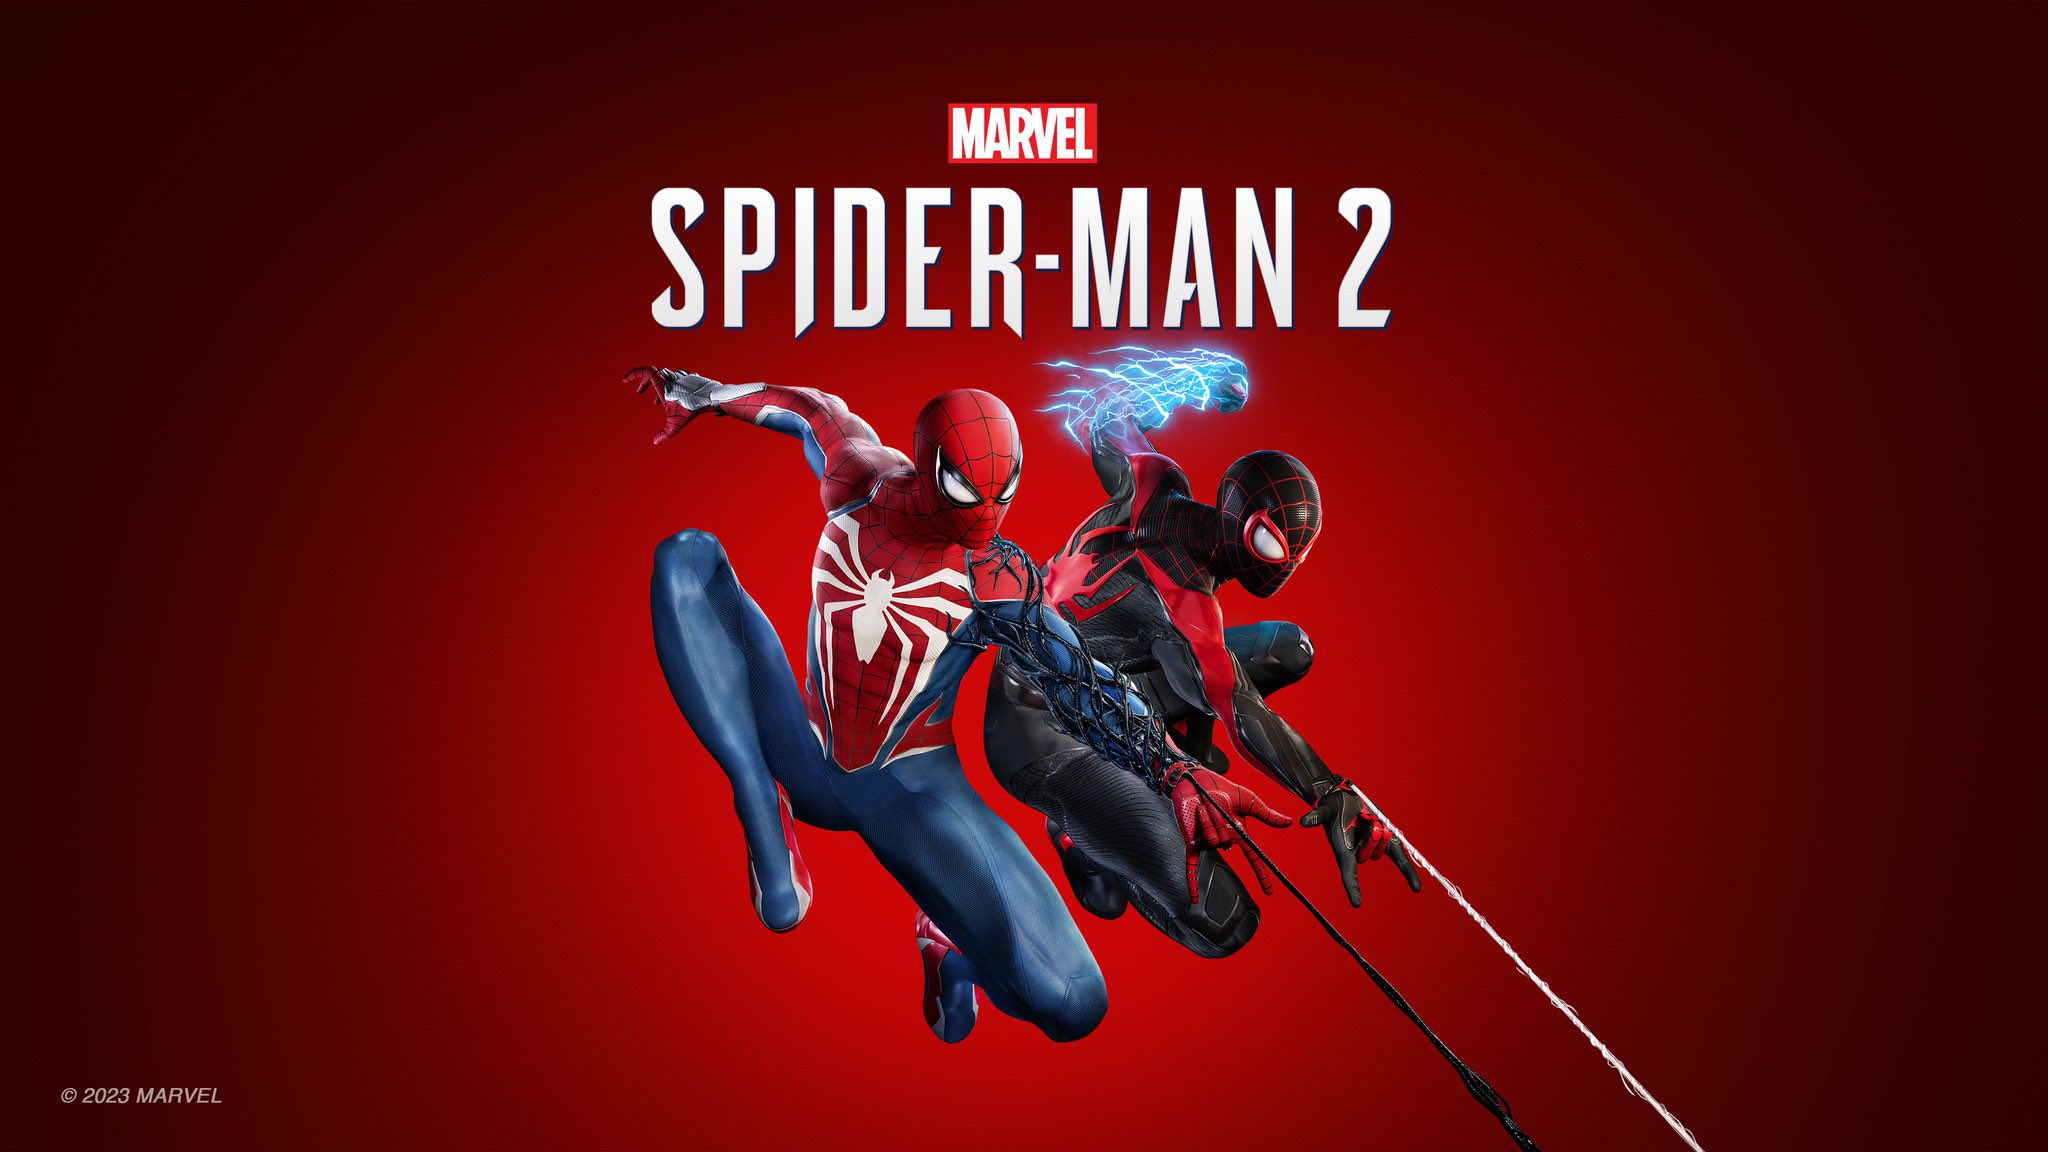 Walmart Canada Gaming on X: Critics have spoken, and it looks like  Insomniac Games stuck the landing with Marvel's Spider-Man 2! It arrives  exclusively for PlayStation 5 on October 20th. Pre-orders are still open at  Walmart Canada. ➡️